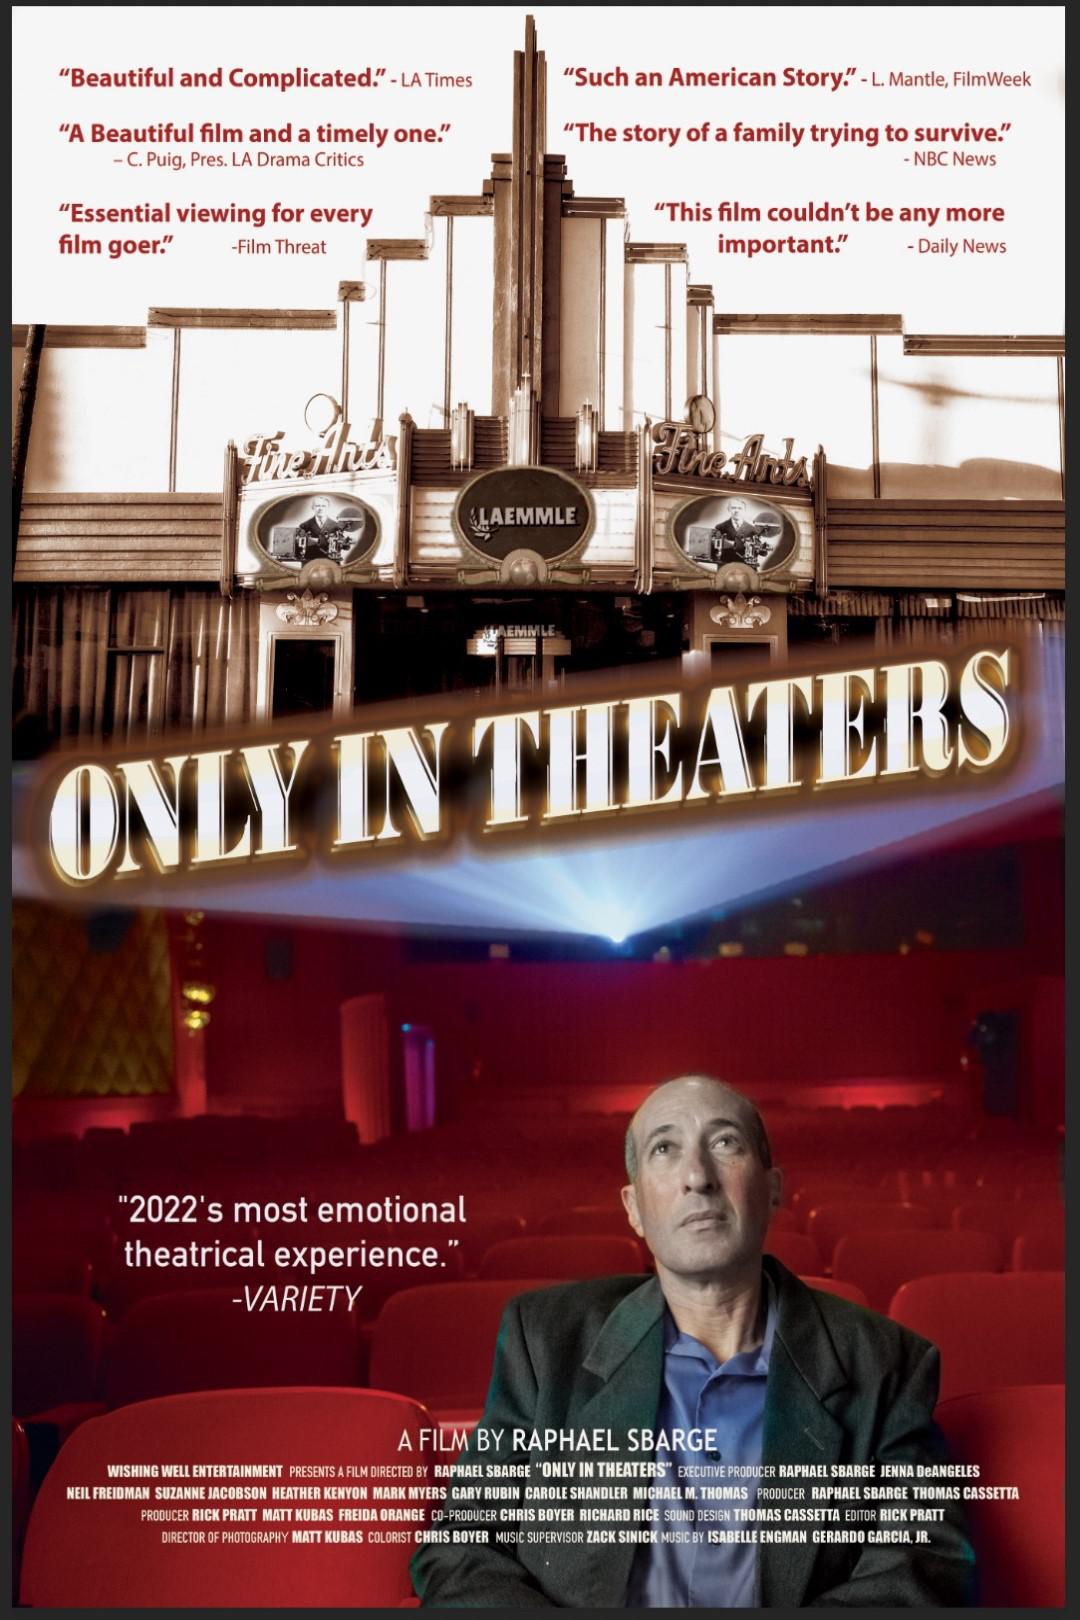 Only in Theaters - Laemmle.com